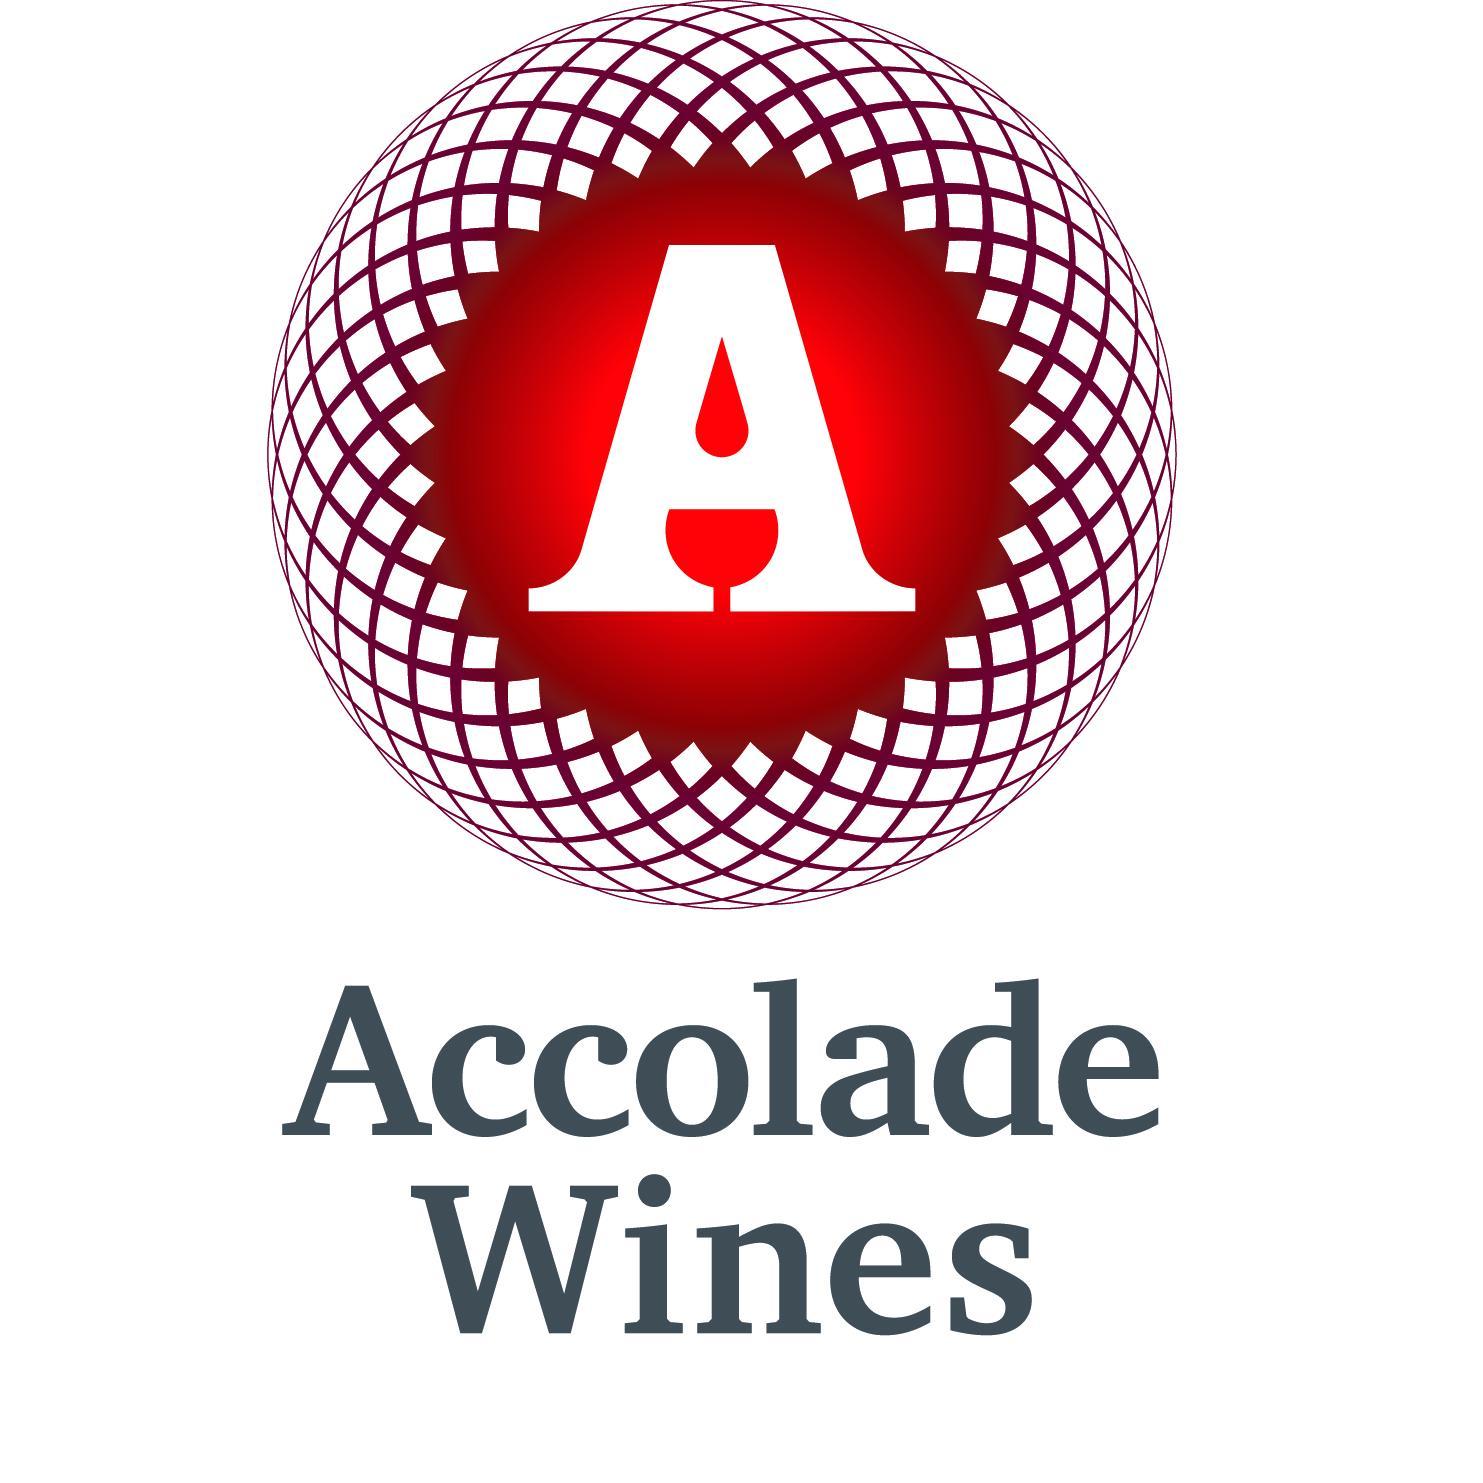 This is the official voice of Accolade Wines in New Zealand.
You must be over legal purchase age in your country of access to follow. Please drink responsibly.